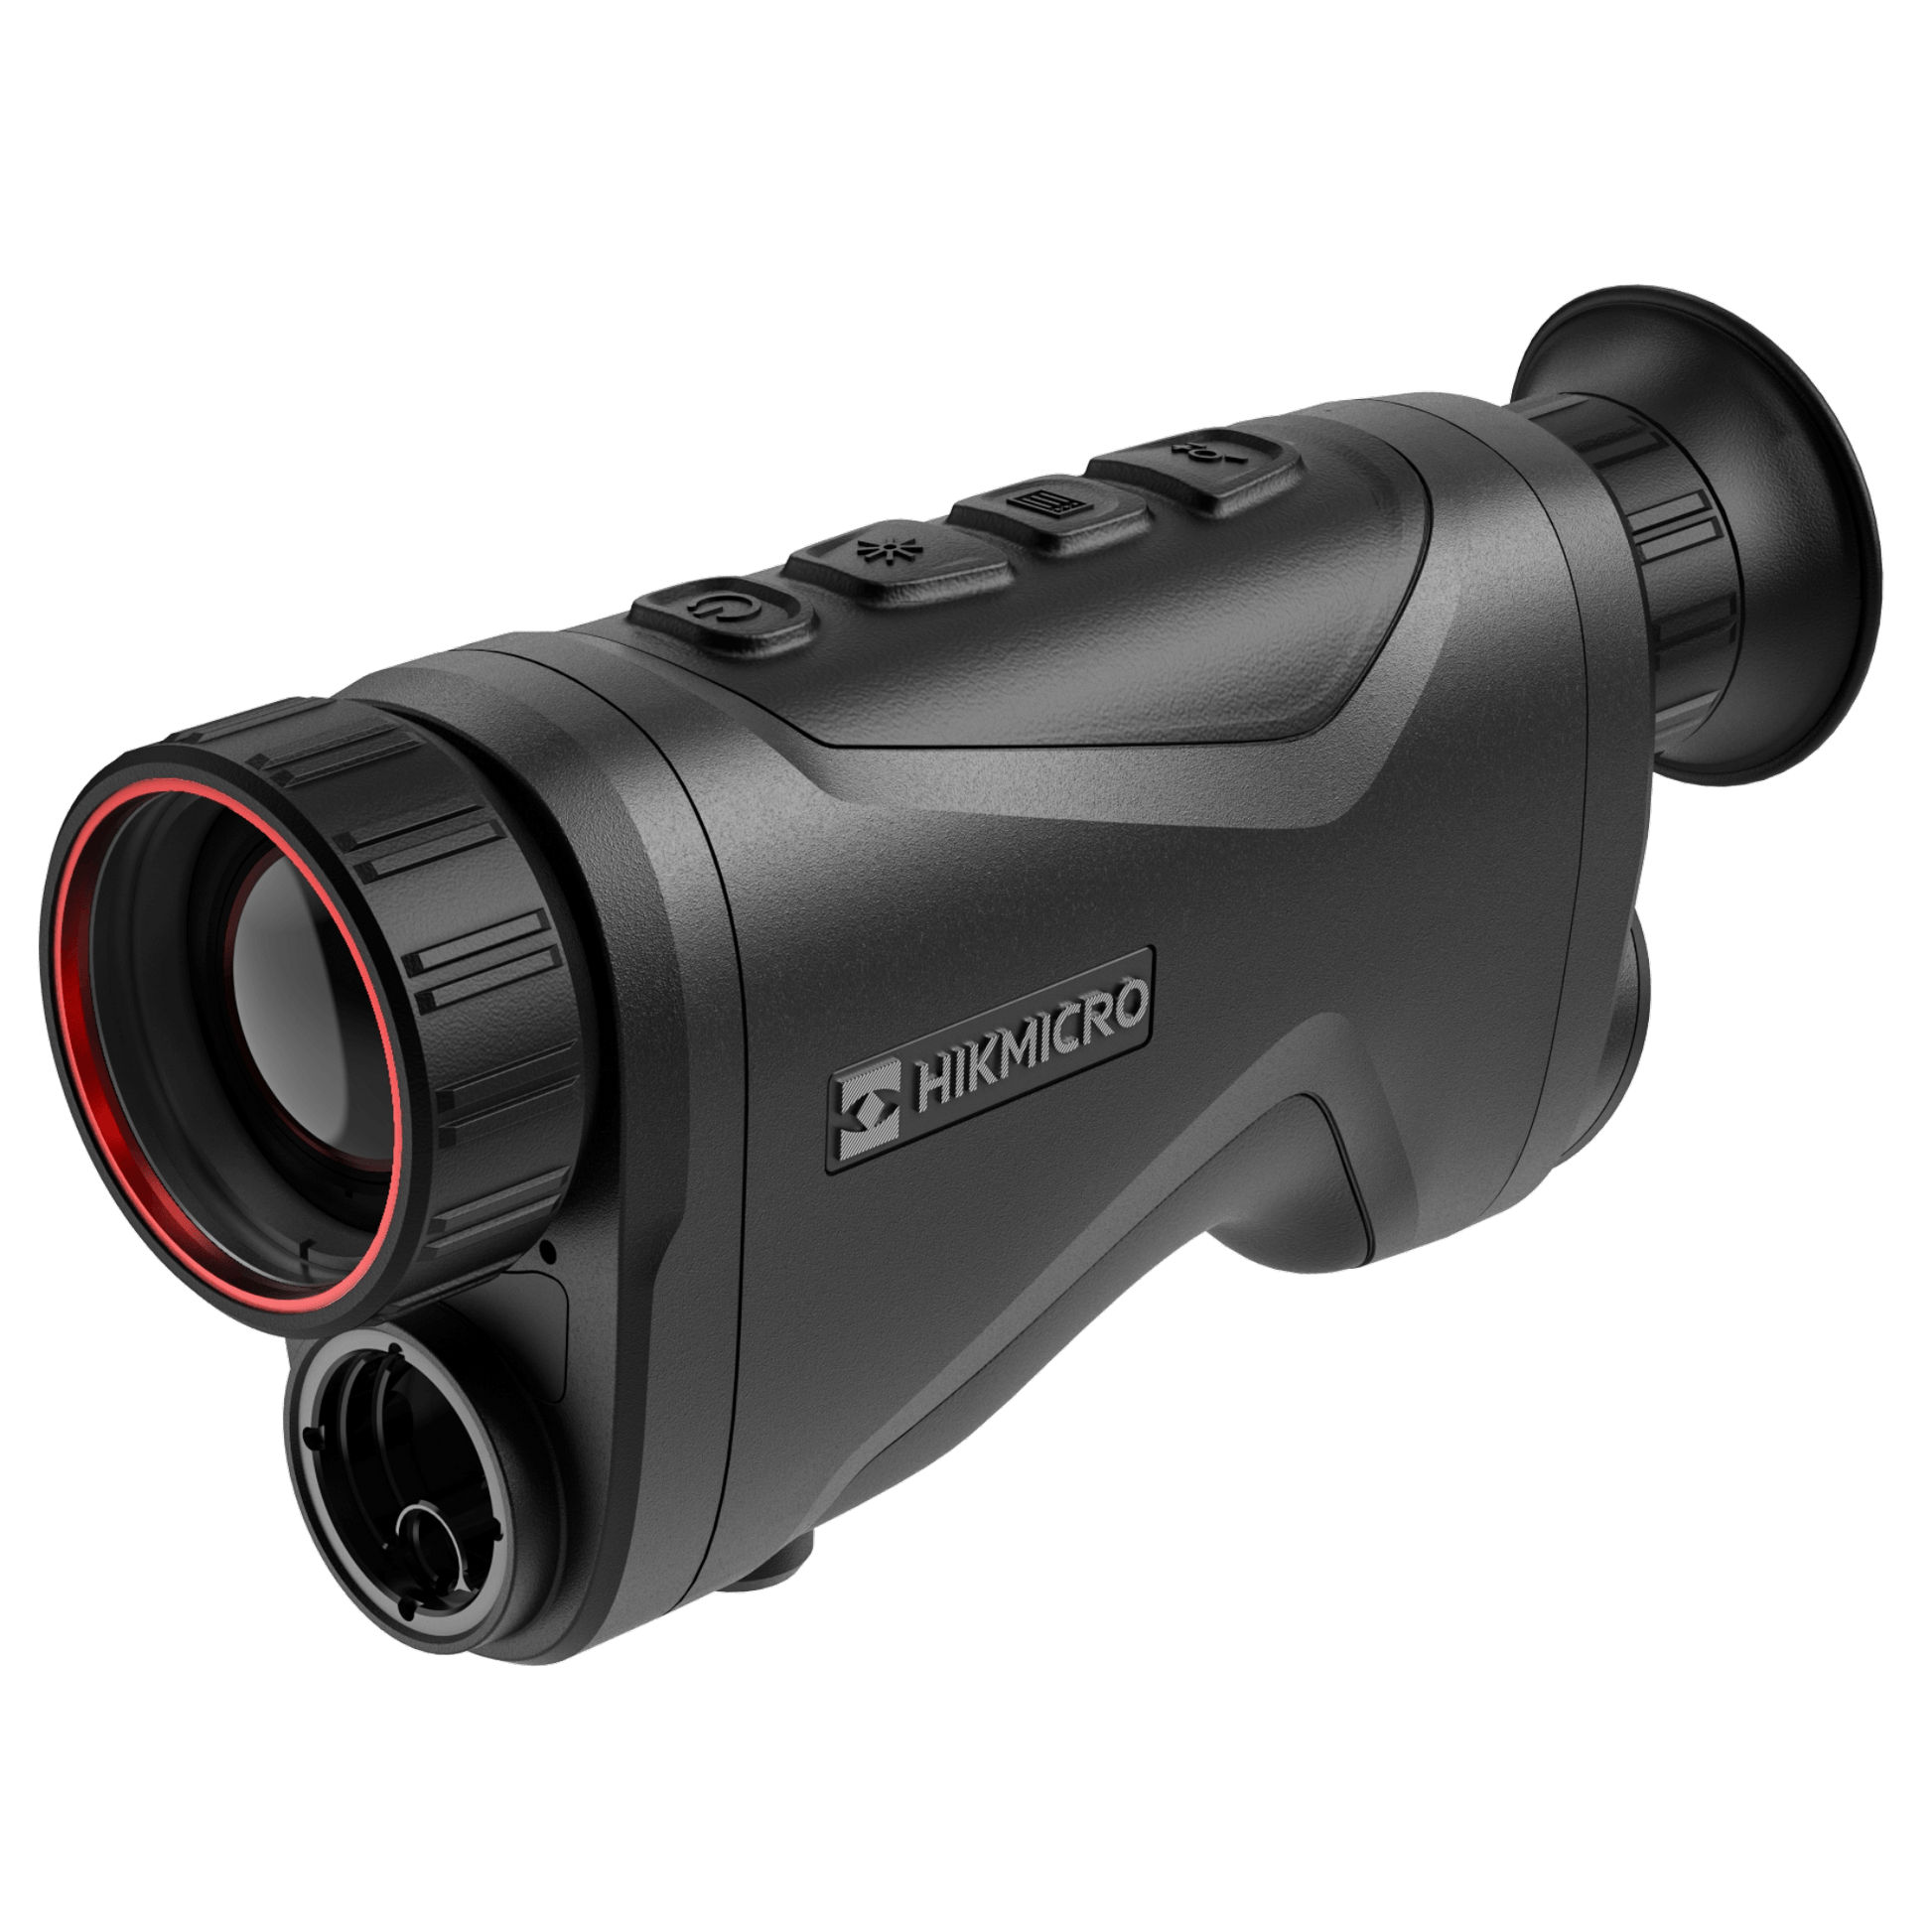 Front view of the HikMicro Condor CQ35L thermal monocular with laser rangefinder, highlighting the prominent germanium lens circled in red and the adjacent laser rangefinder. The sleek black design contrasts with the silver HikMicro logo, and tactile buttons are visible on top.